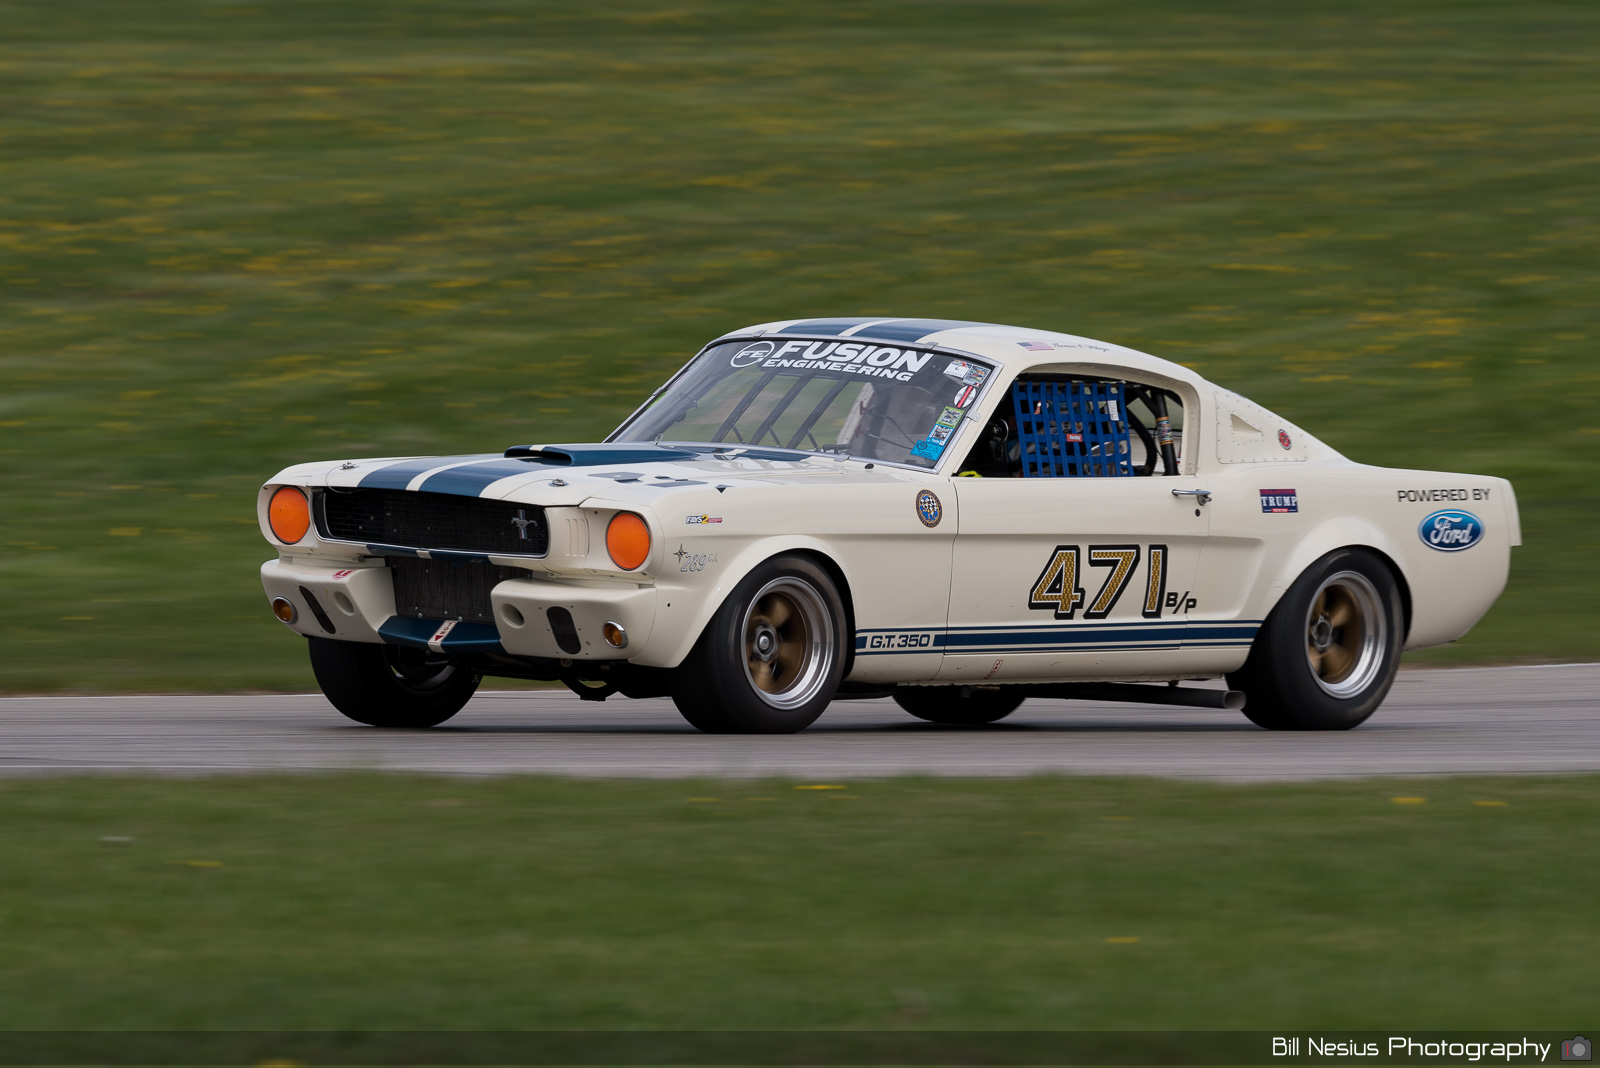 1966 Ford Mustang Shelby GT350 Number 471 / DSC_0500 / 4